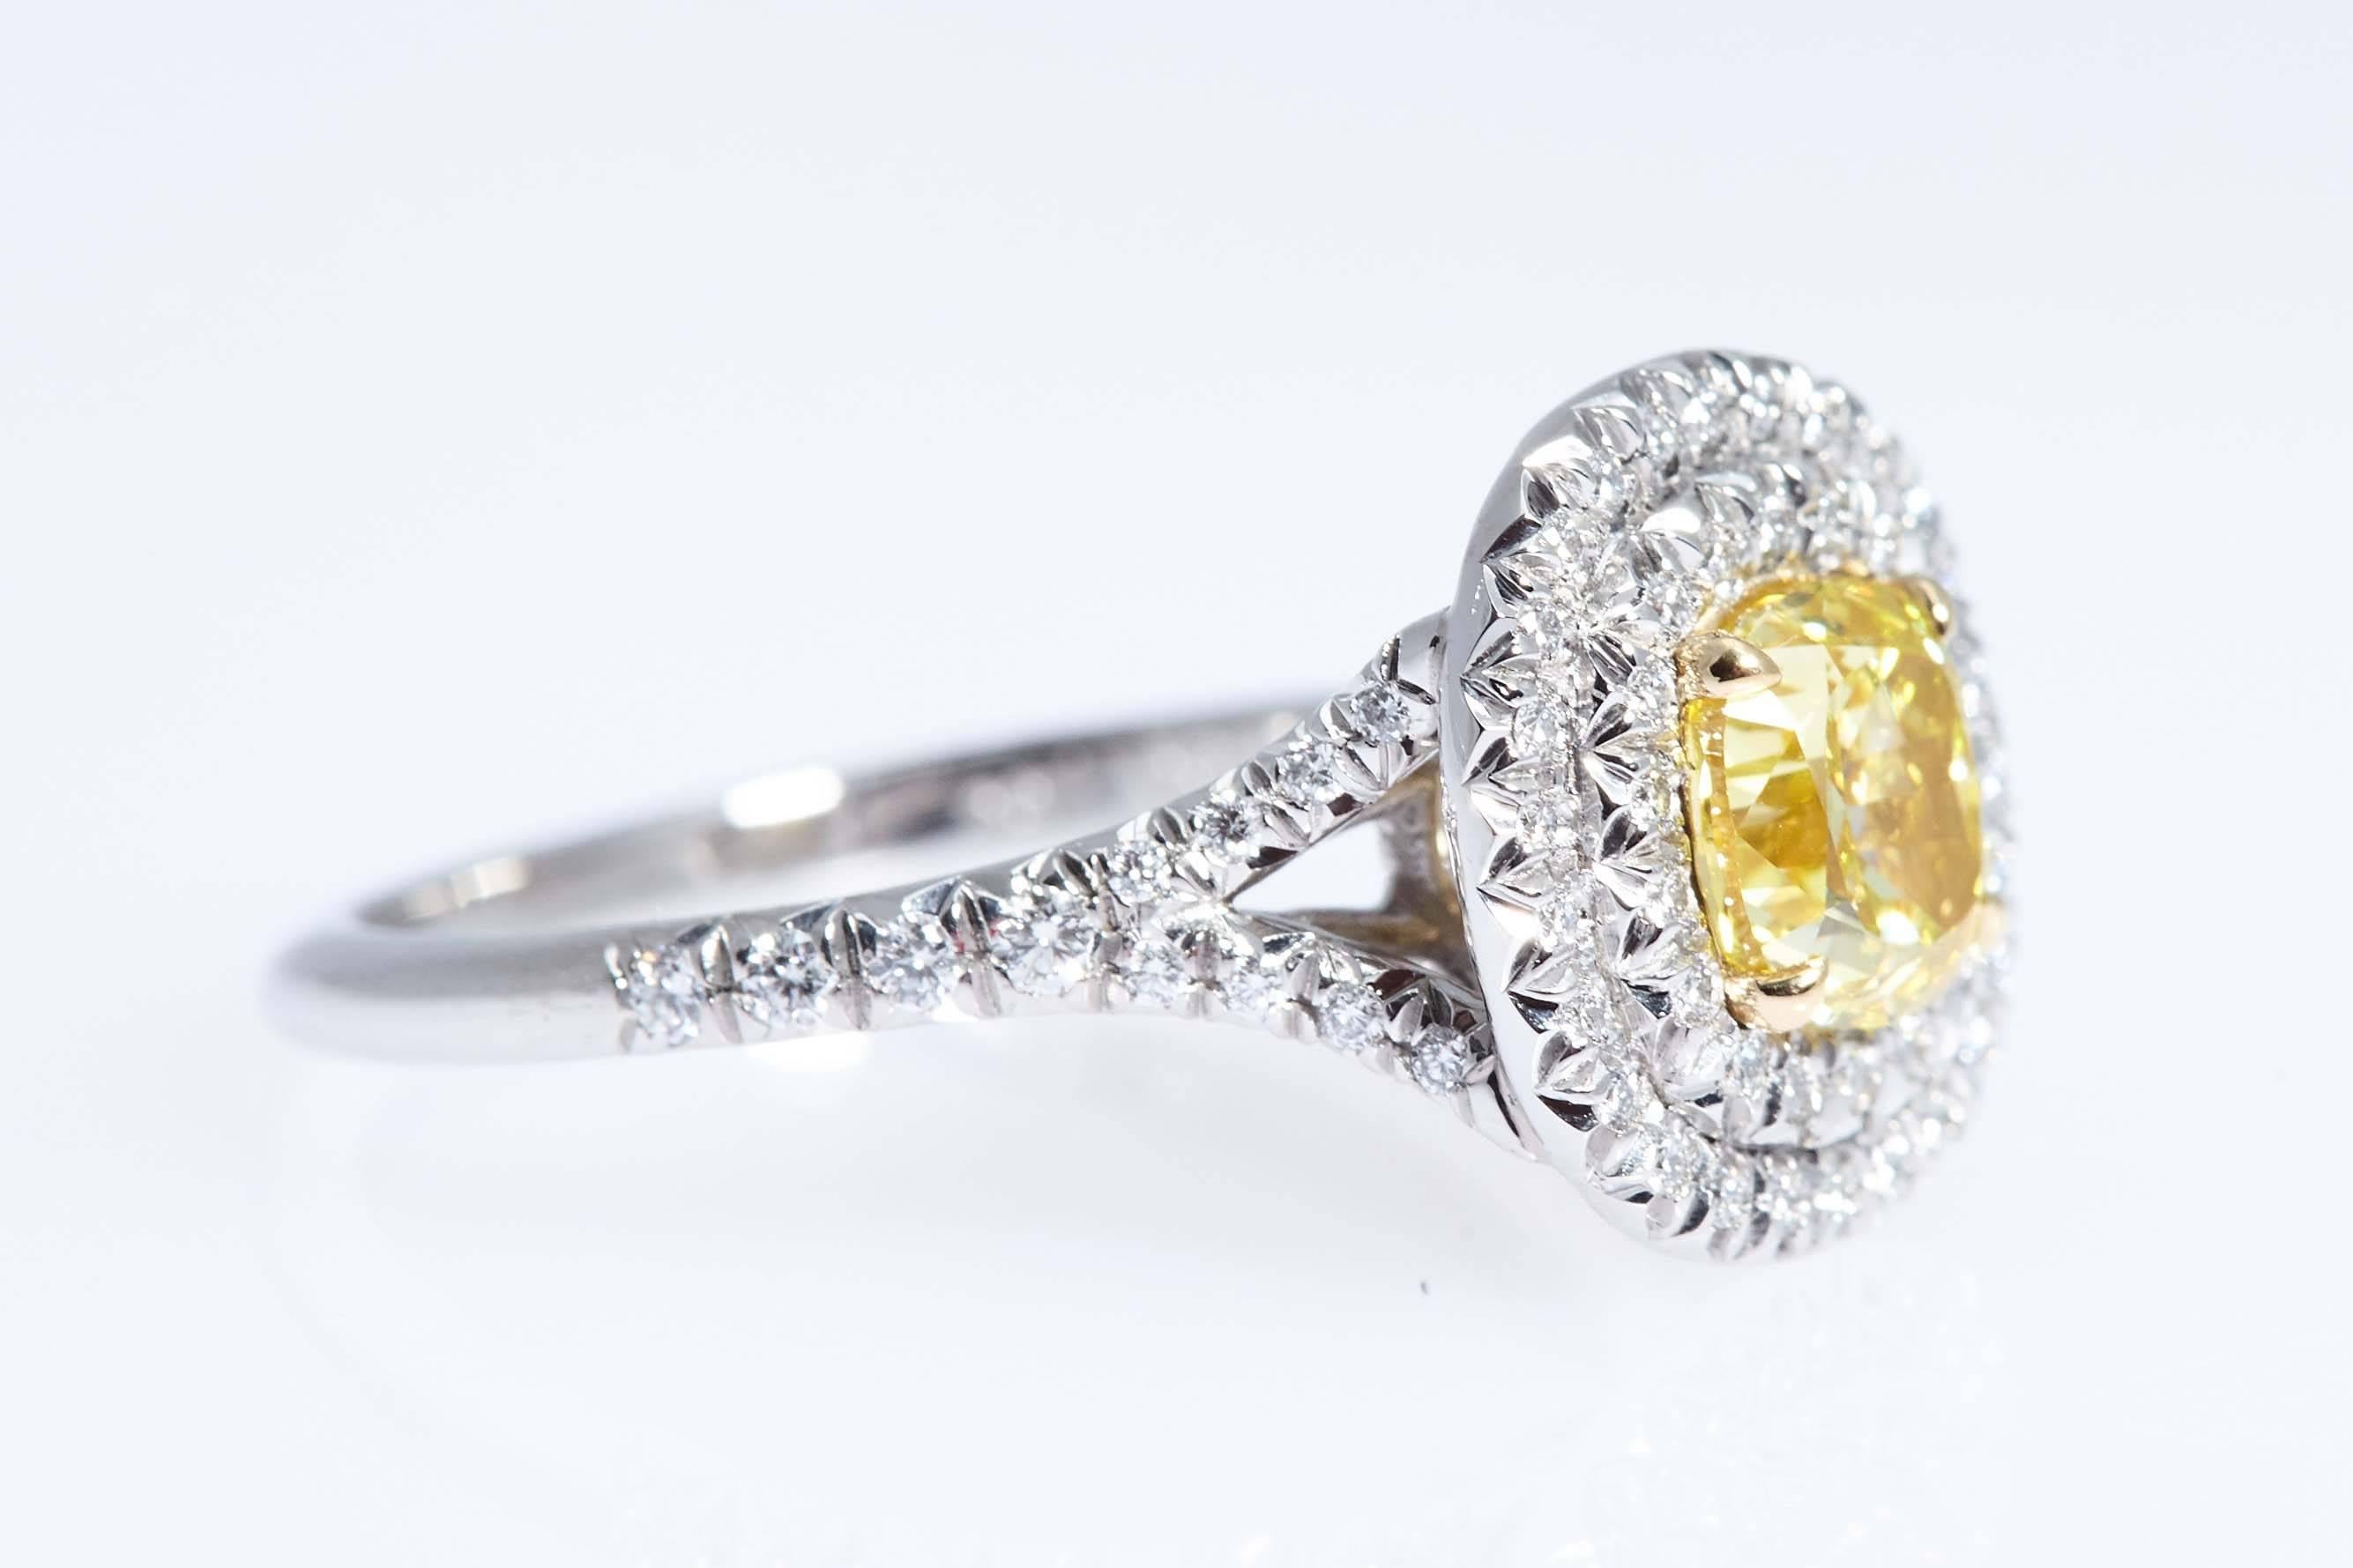 GIA graded Fancy Vivid Yellow Color and "SI1" clarity 1.04 carats cushion shaped diamond. The diamond is set in a custom made platinum and 18 karat yellow gold ring with two rows of diamonds encircling the cushion shaped diamond and